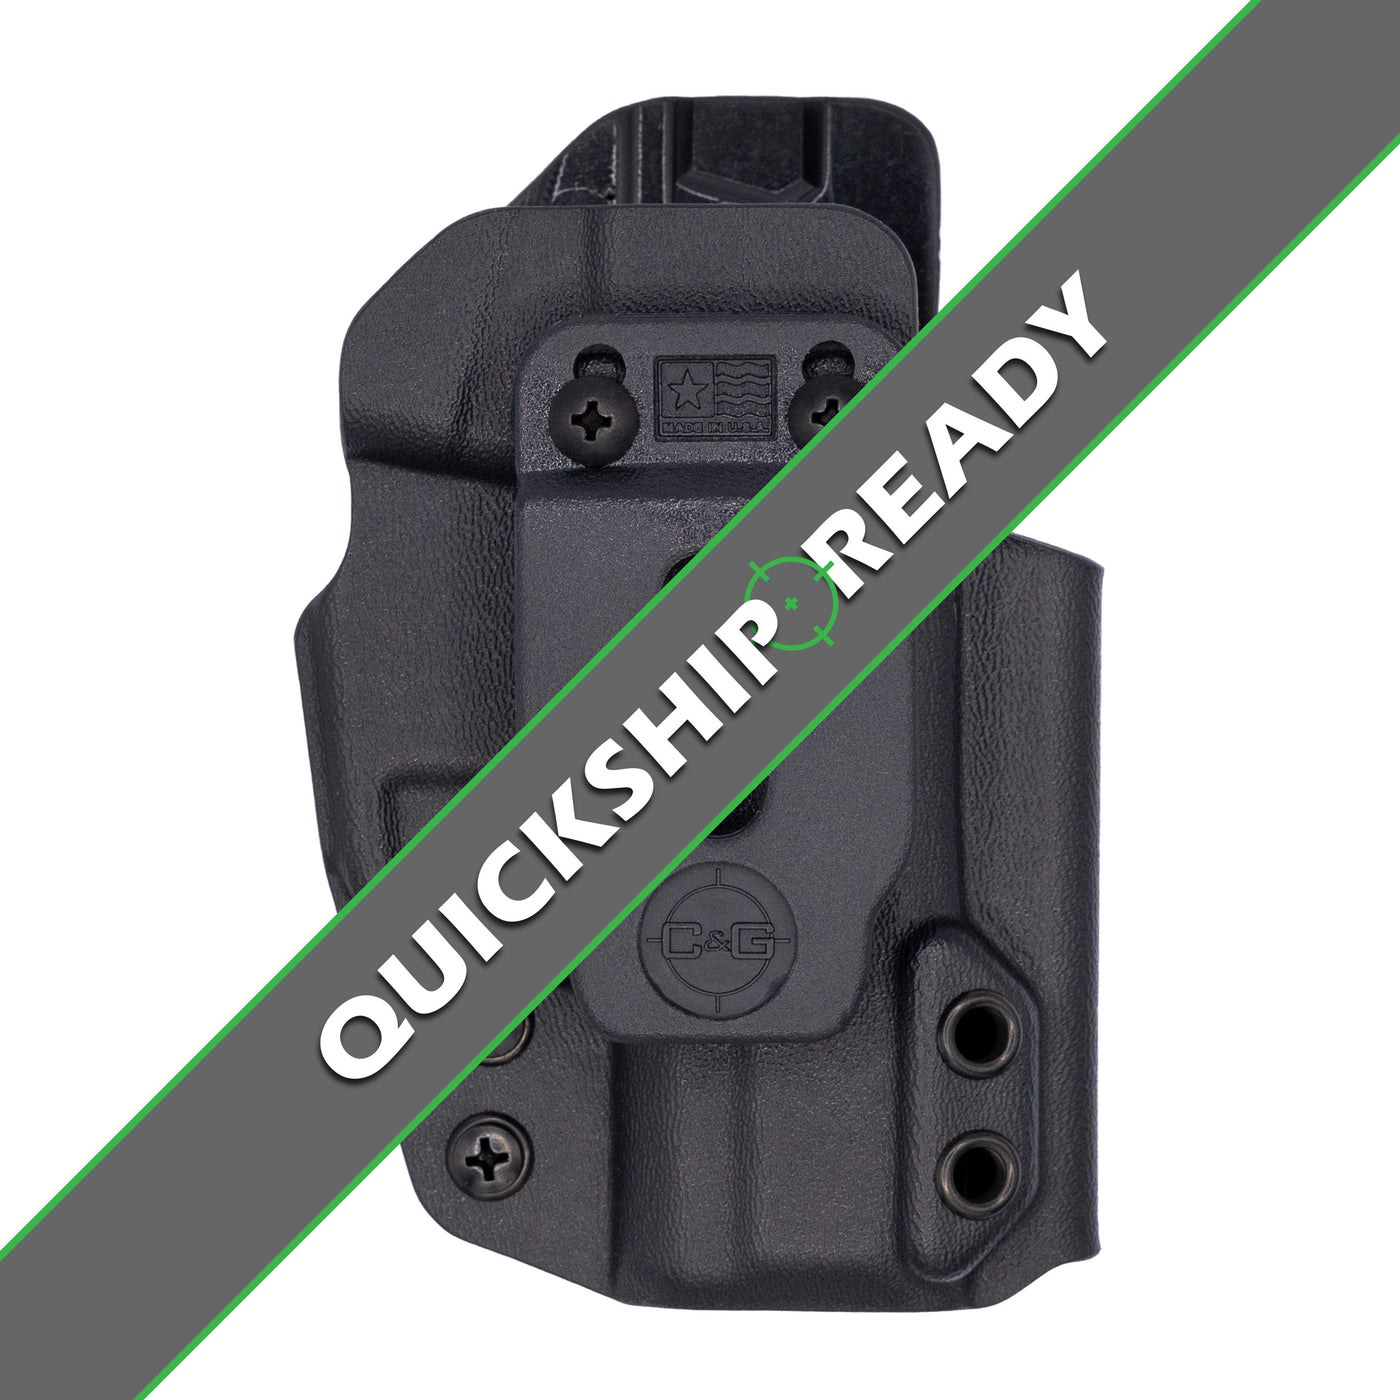 Shown is the Quickship C&G Holsters IWB inside the waistband Holster for the Ruger MAX9.